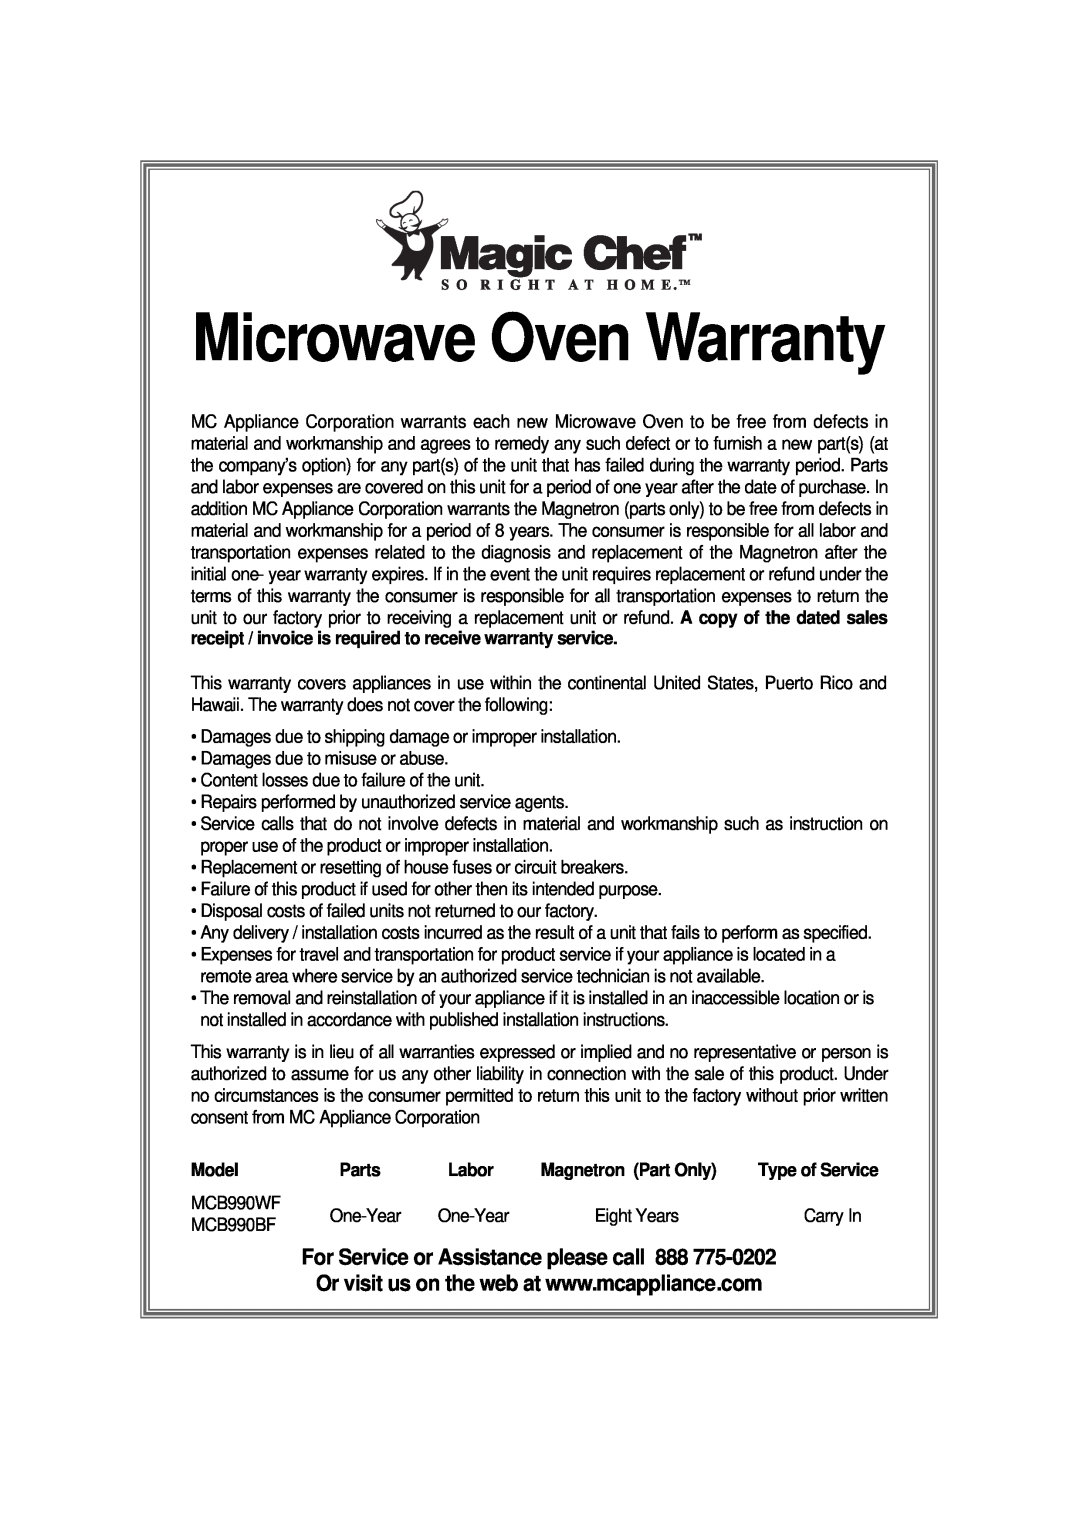 Magic Chef MCD990BF, MCD990WF instruction manual Microwave Oven Warranty, Model, Parts, Labor, Magnetron Part Only 